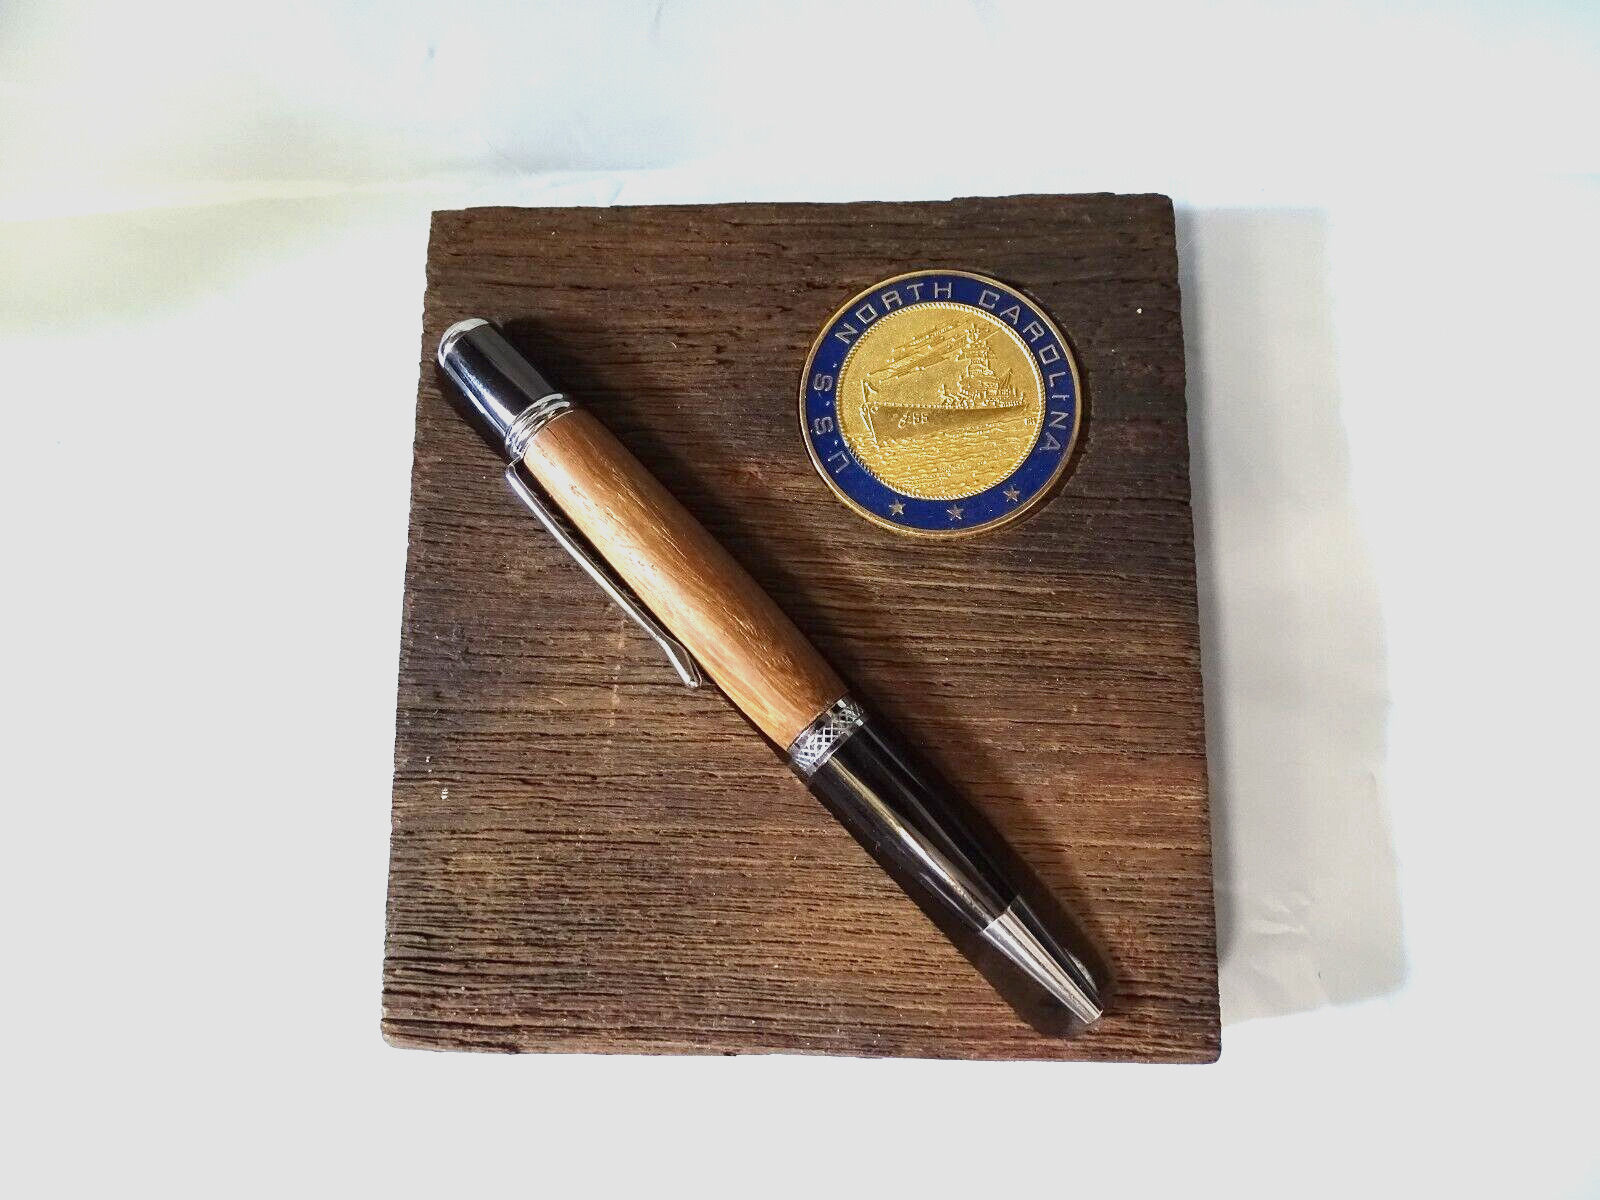 U.S.S. N.C. Pen Desk Set Made From Wood Off the Deck of USS NC with Coin of Ship